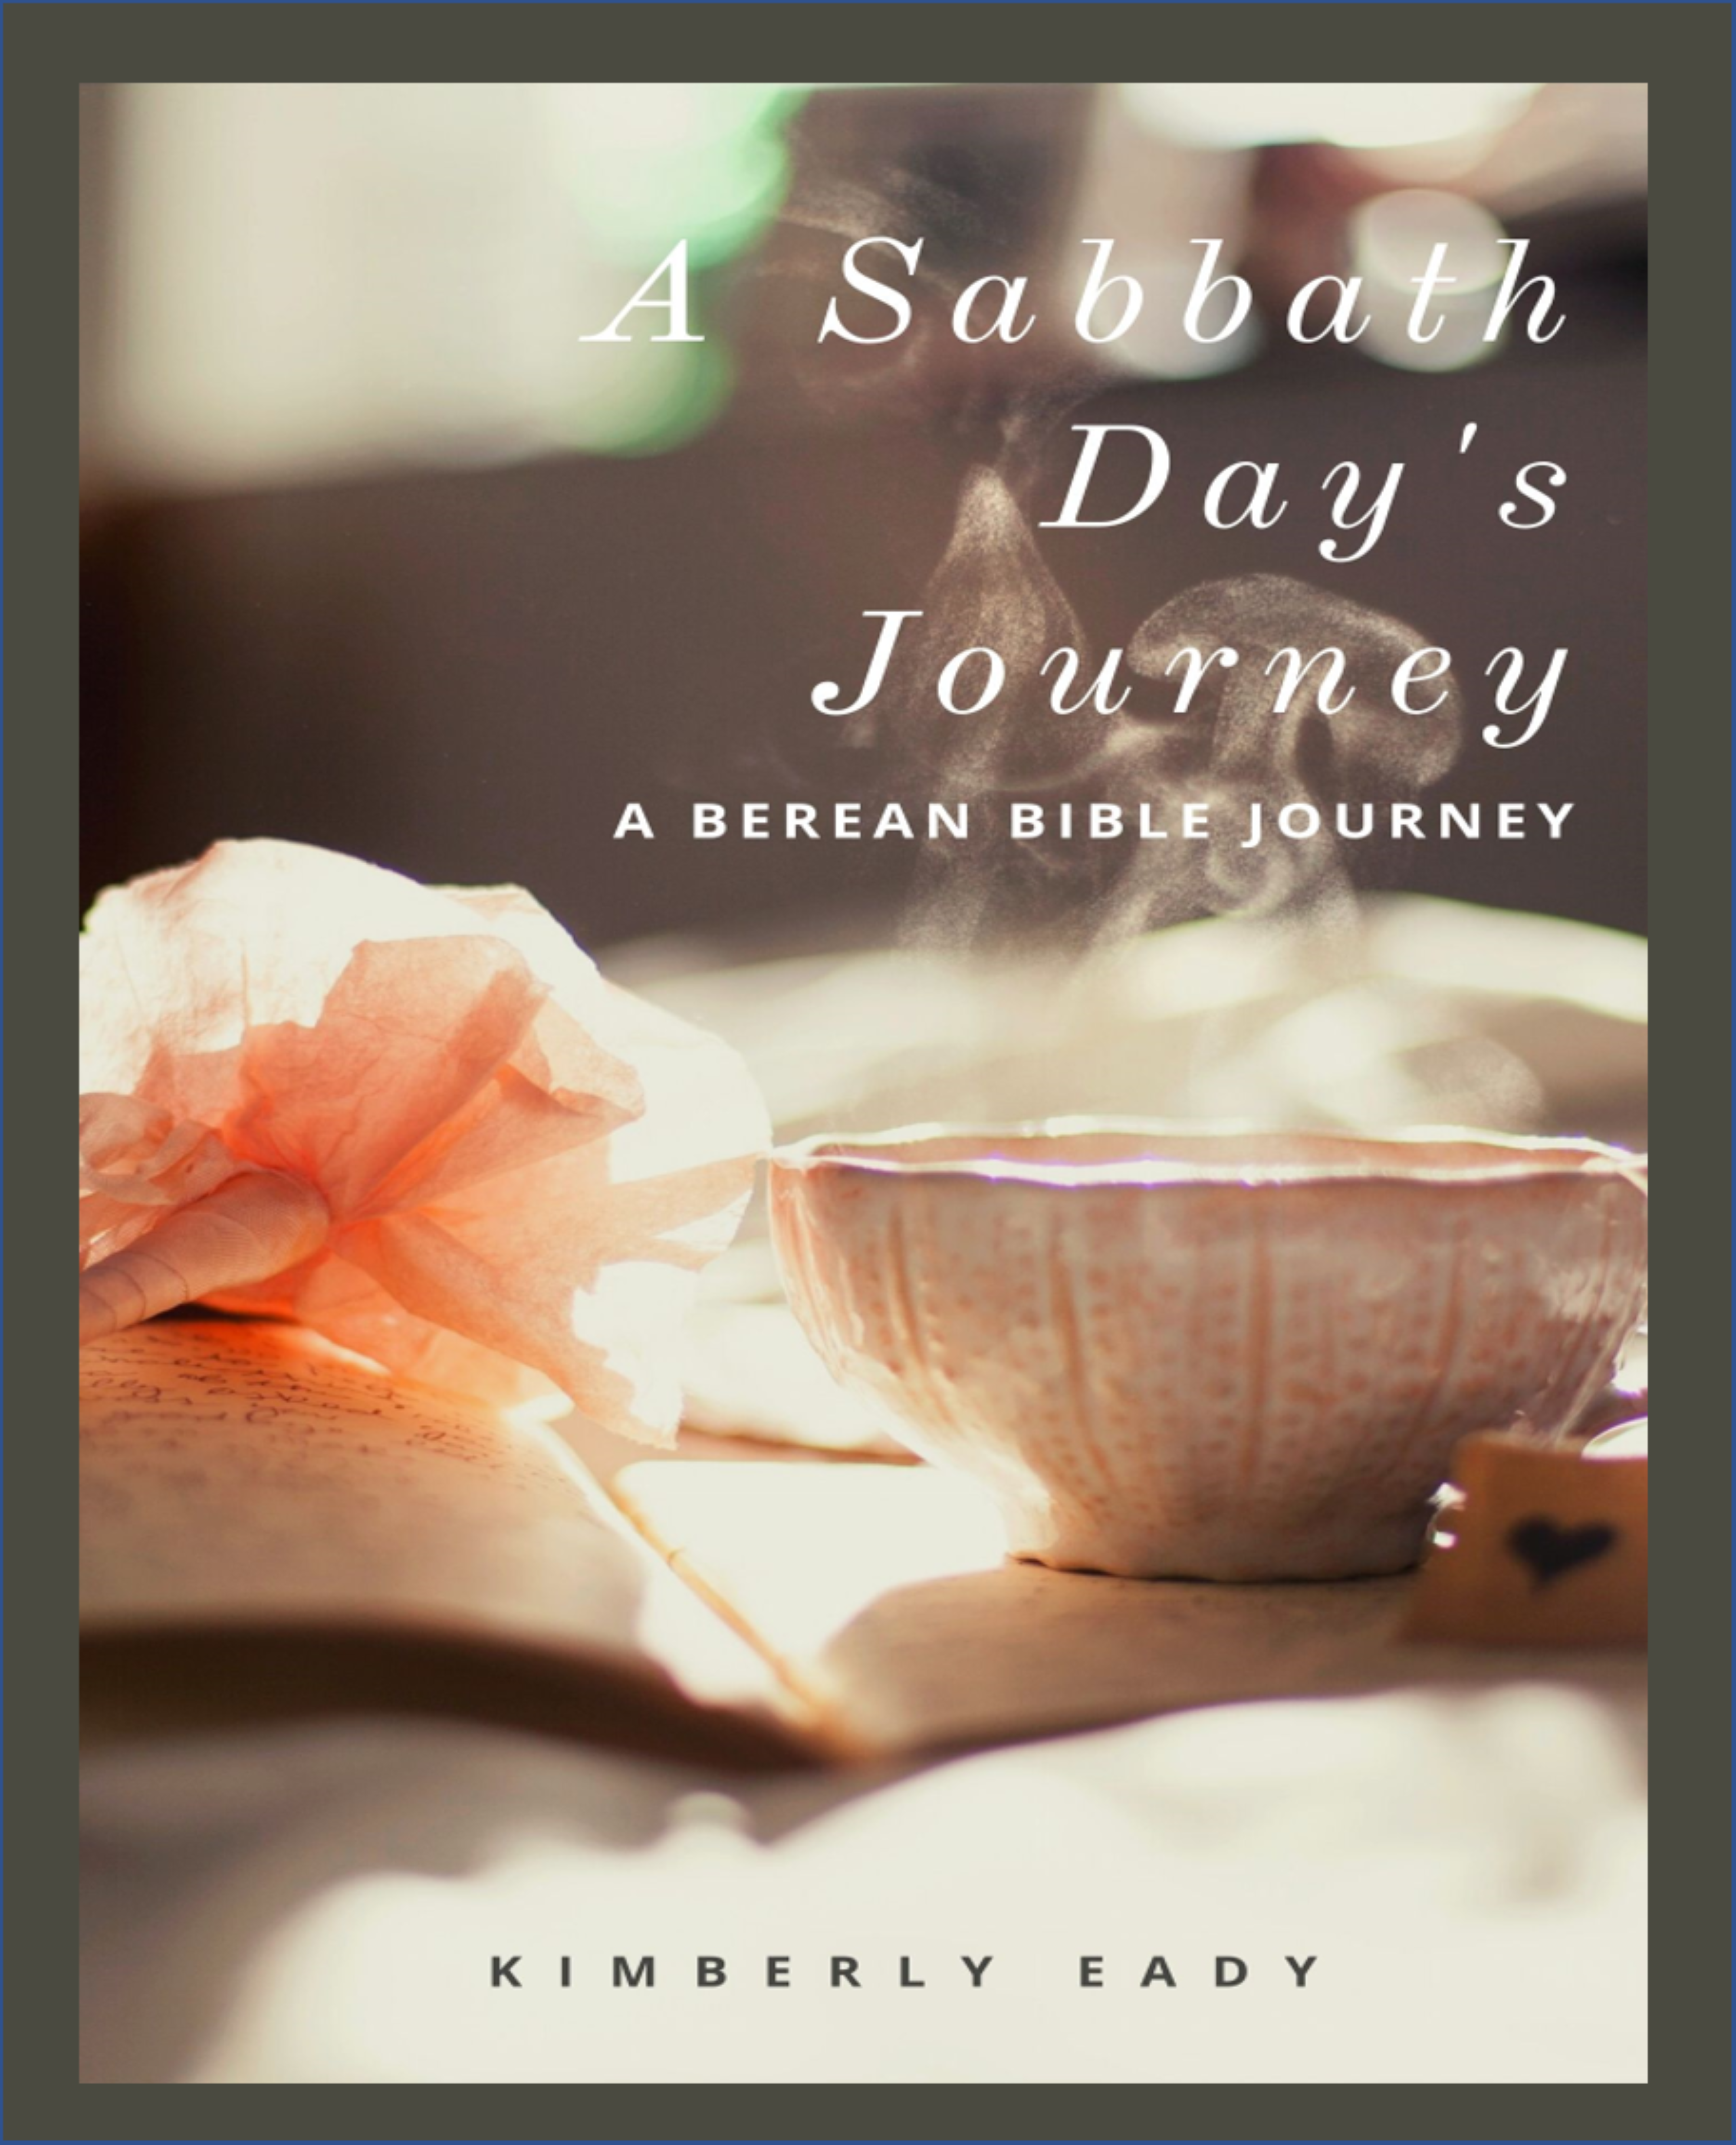 what is the sabbath day journey